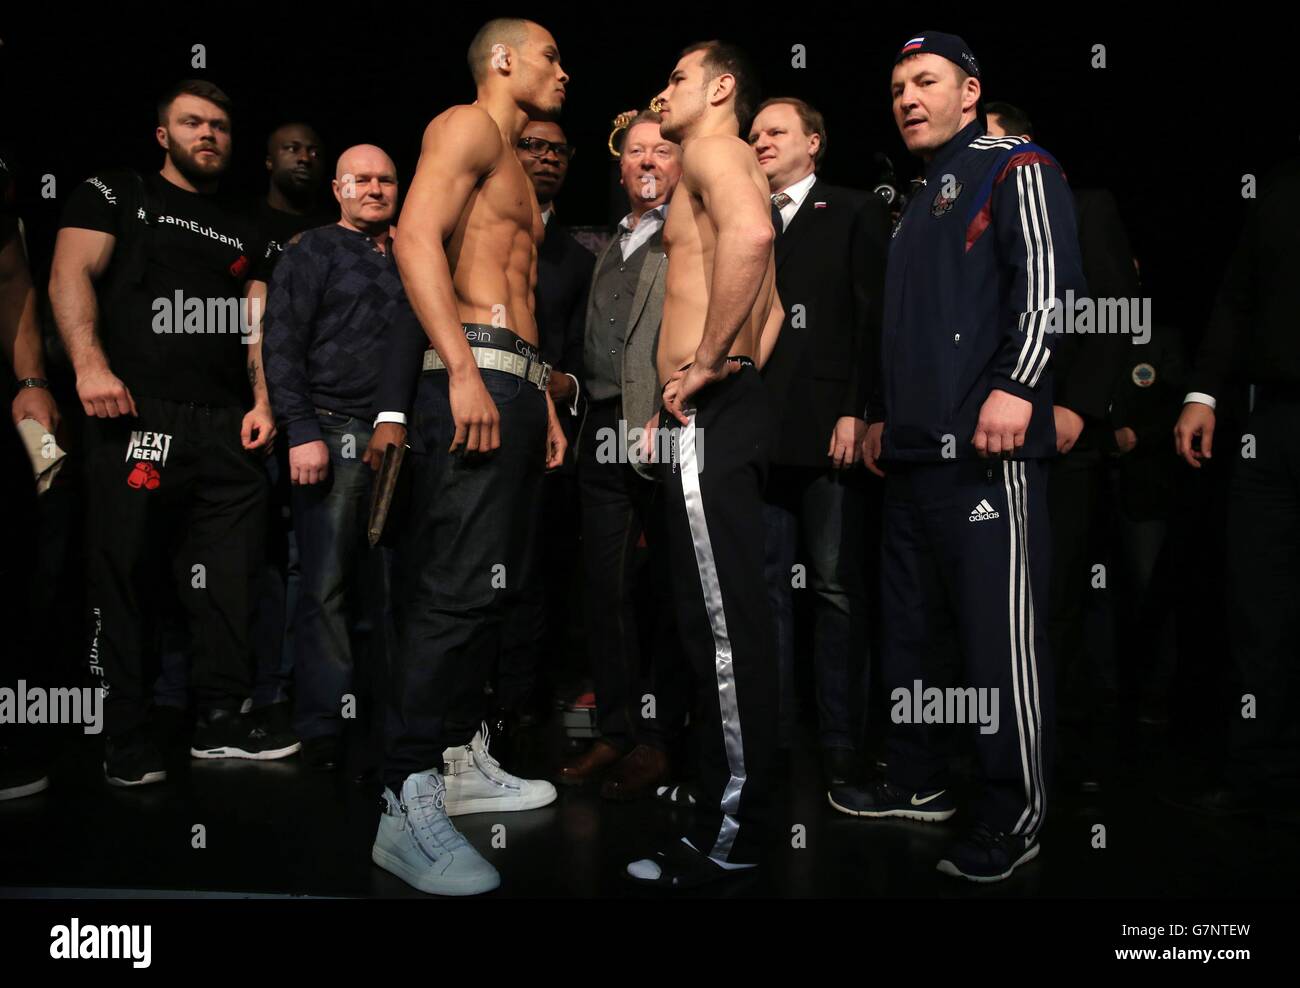 Chris Eubank Junior goes head to head with Dmitry Chudinov ahead of their fight for The Interim WBA Middleweight Championship of the World tomorrow night at the O2, London. Stock Photo